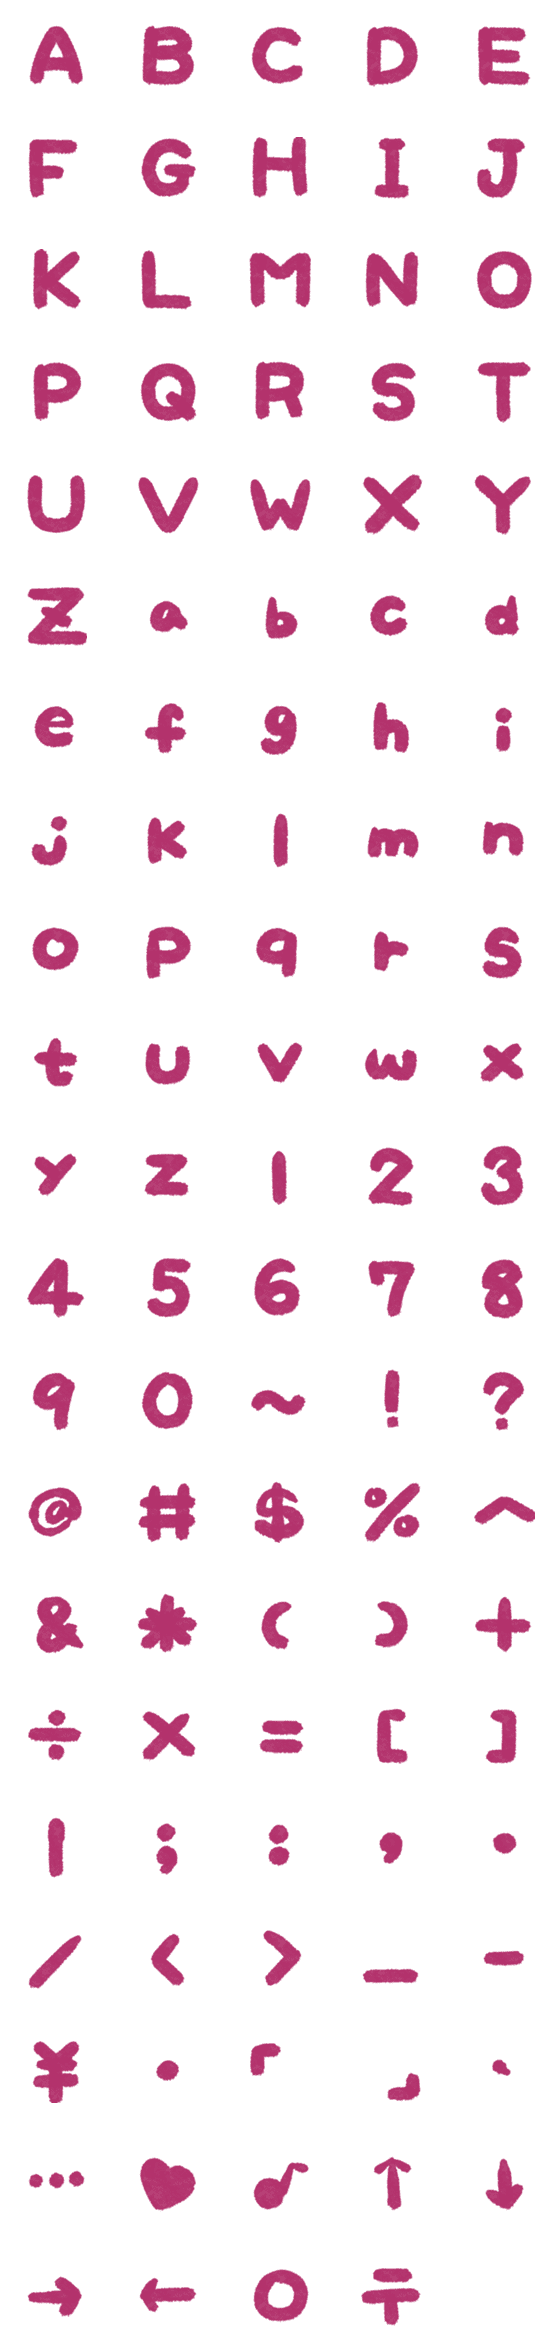 [LINE絵文字]MOODY MAUVE Letter number symbols2の画像一覧